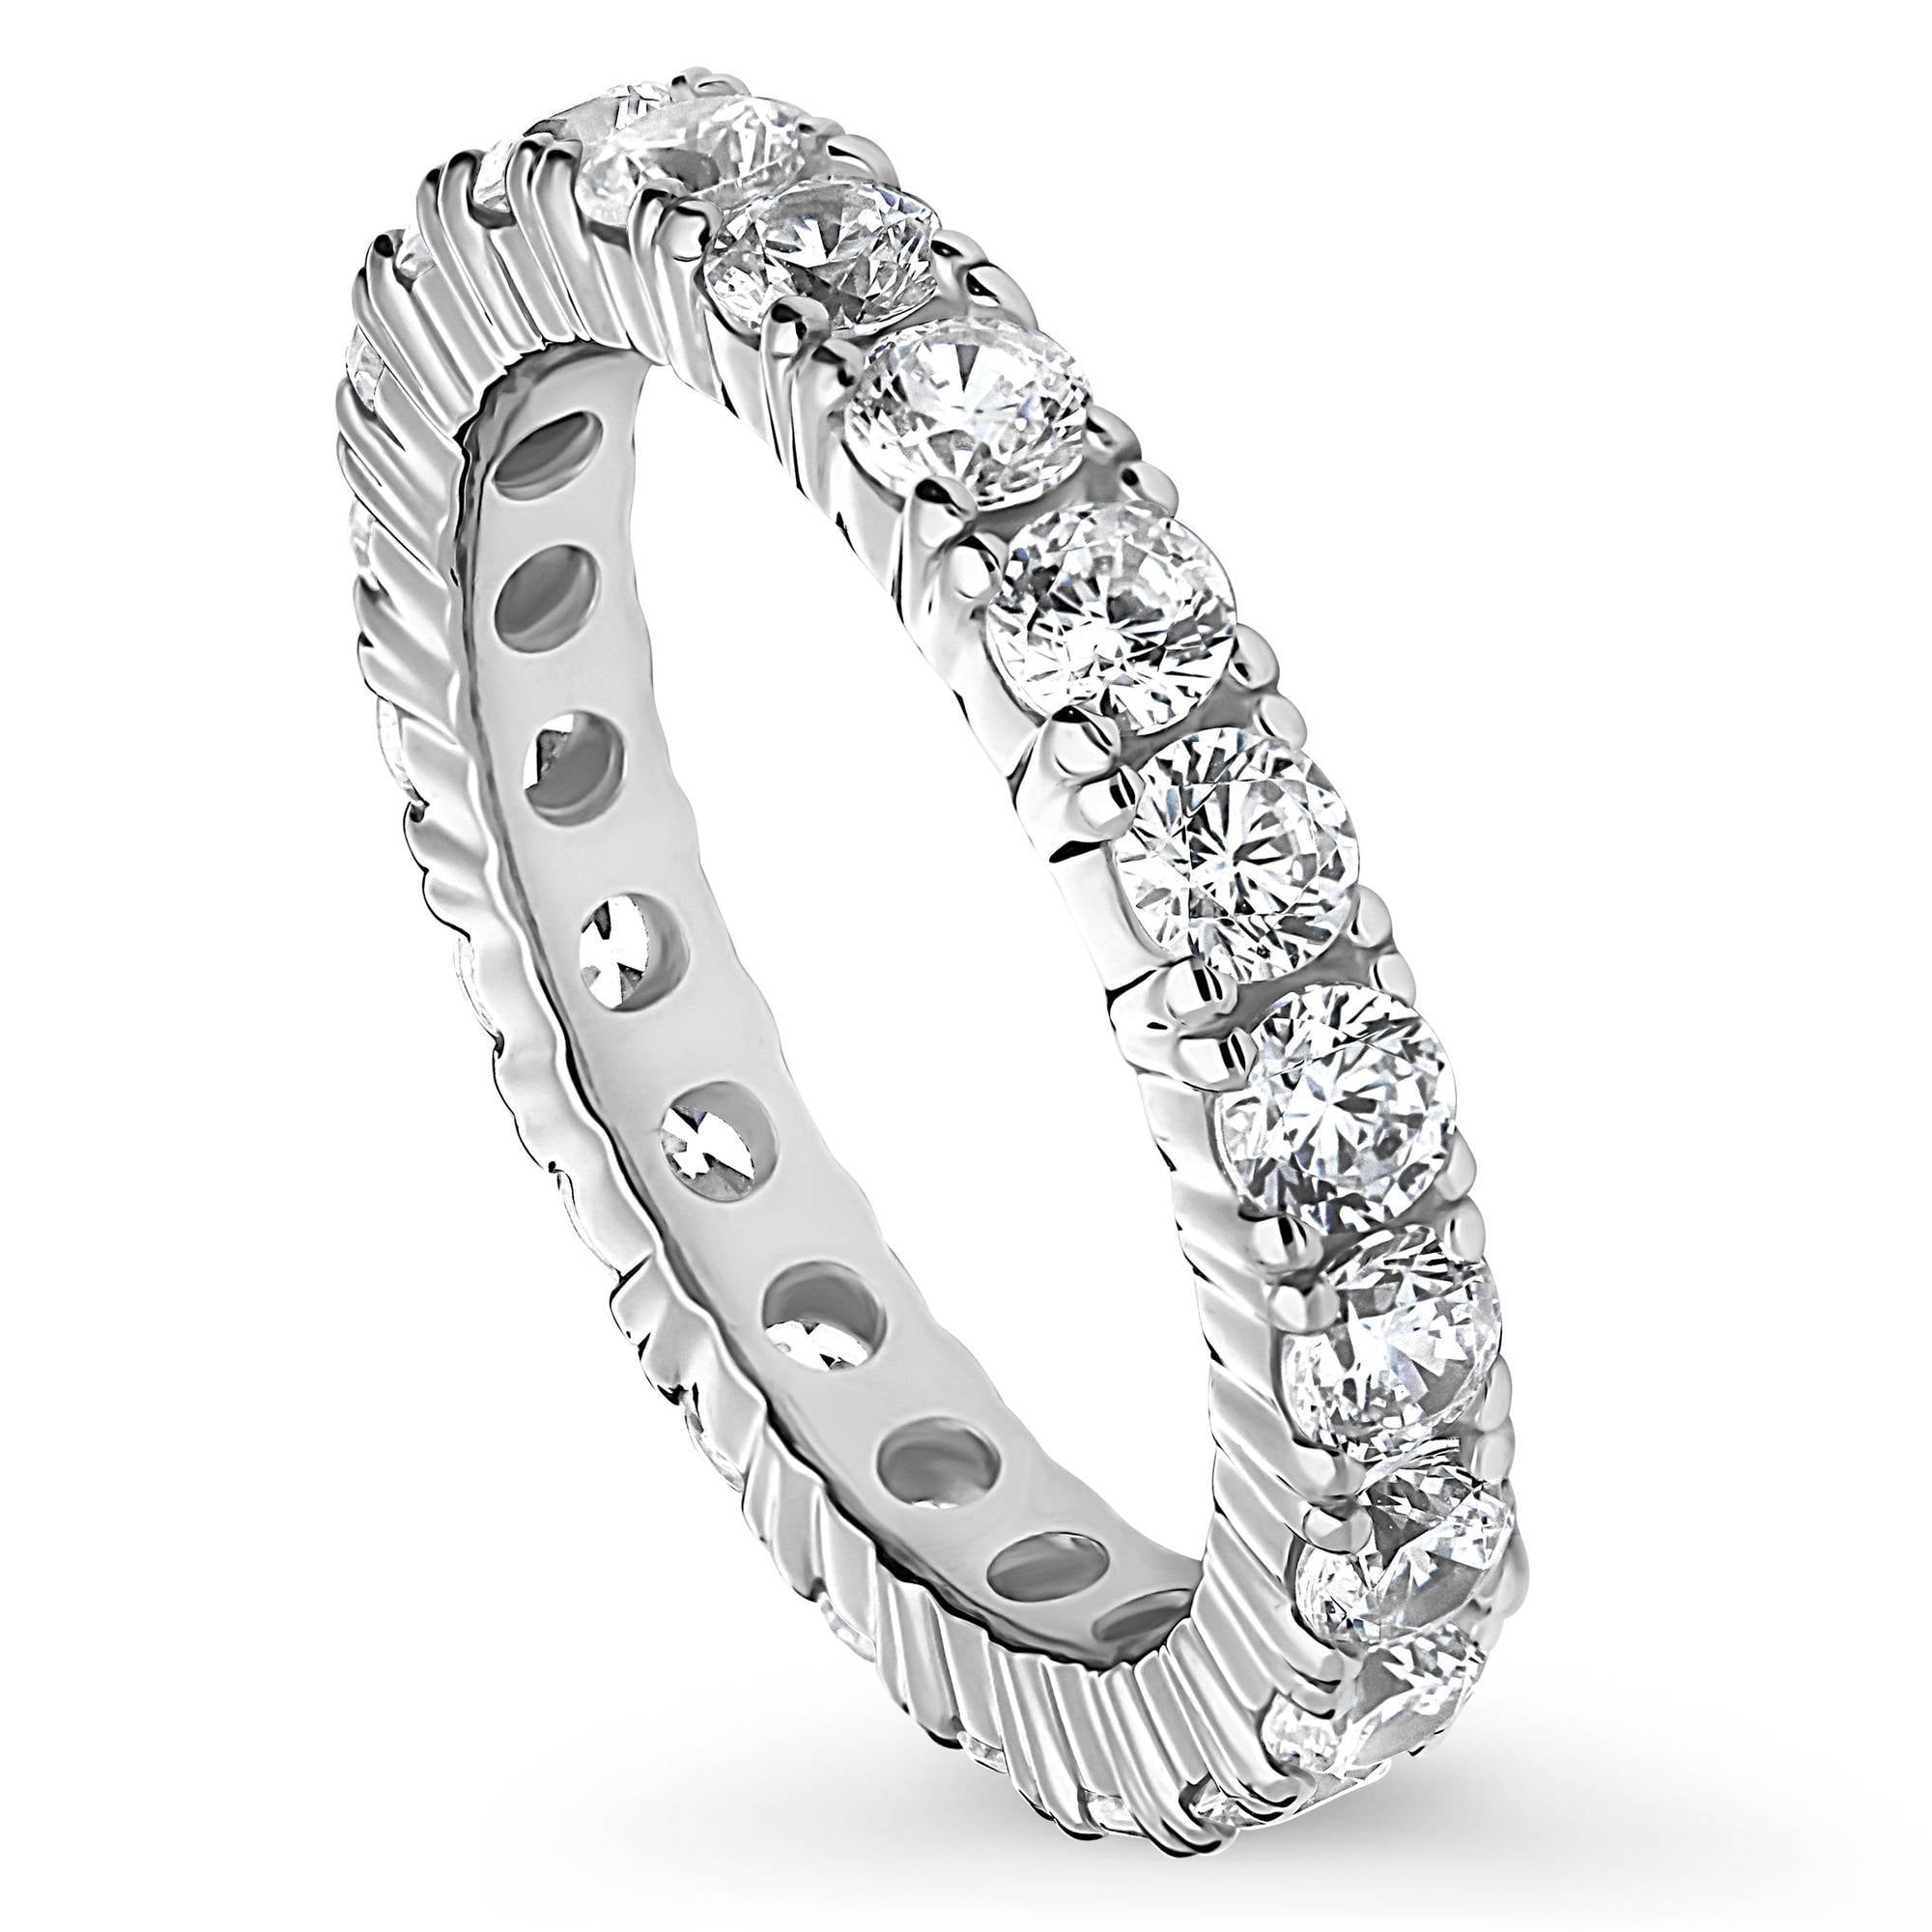 BERRICLE Sterling Silver Wedding Rings Cubic Zirconia CZ